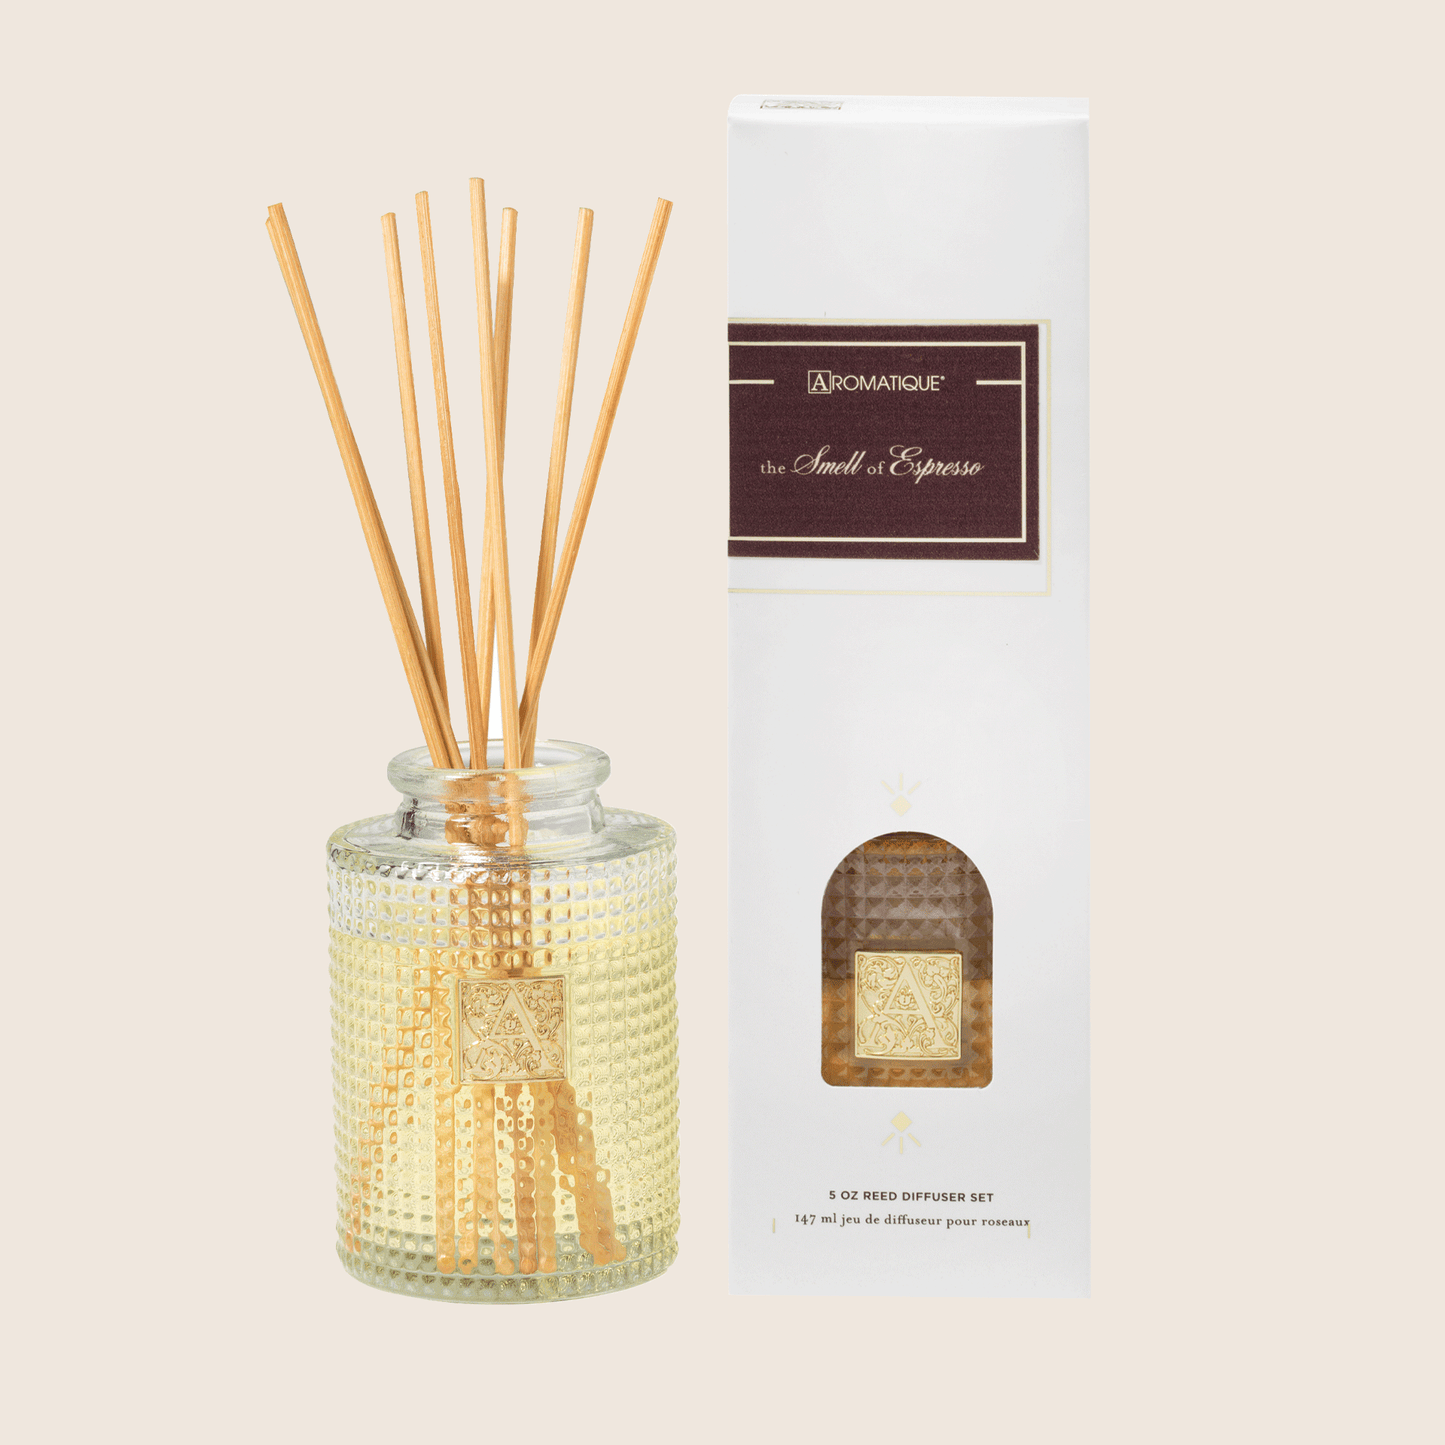 The Smell of Espresso - Reed Diffuser Set